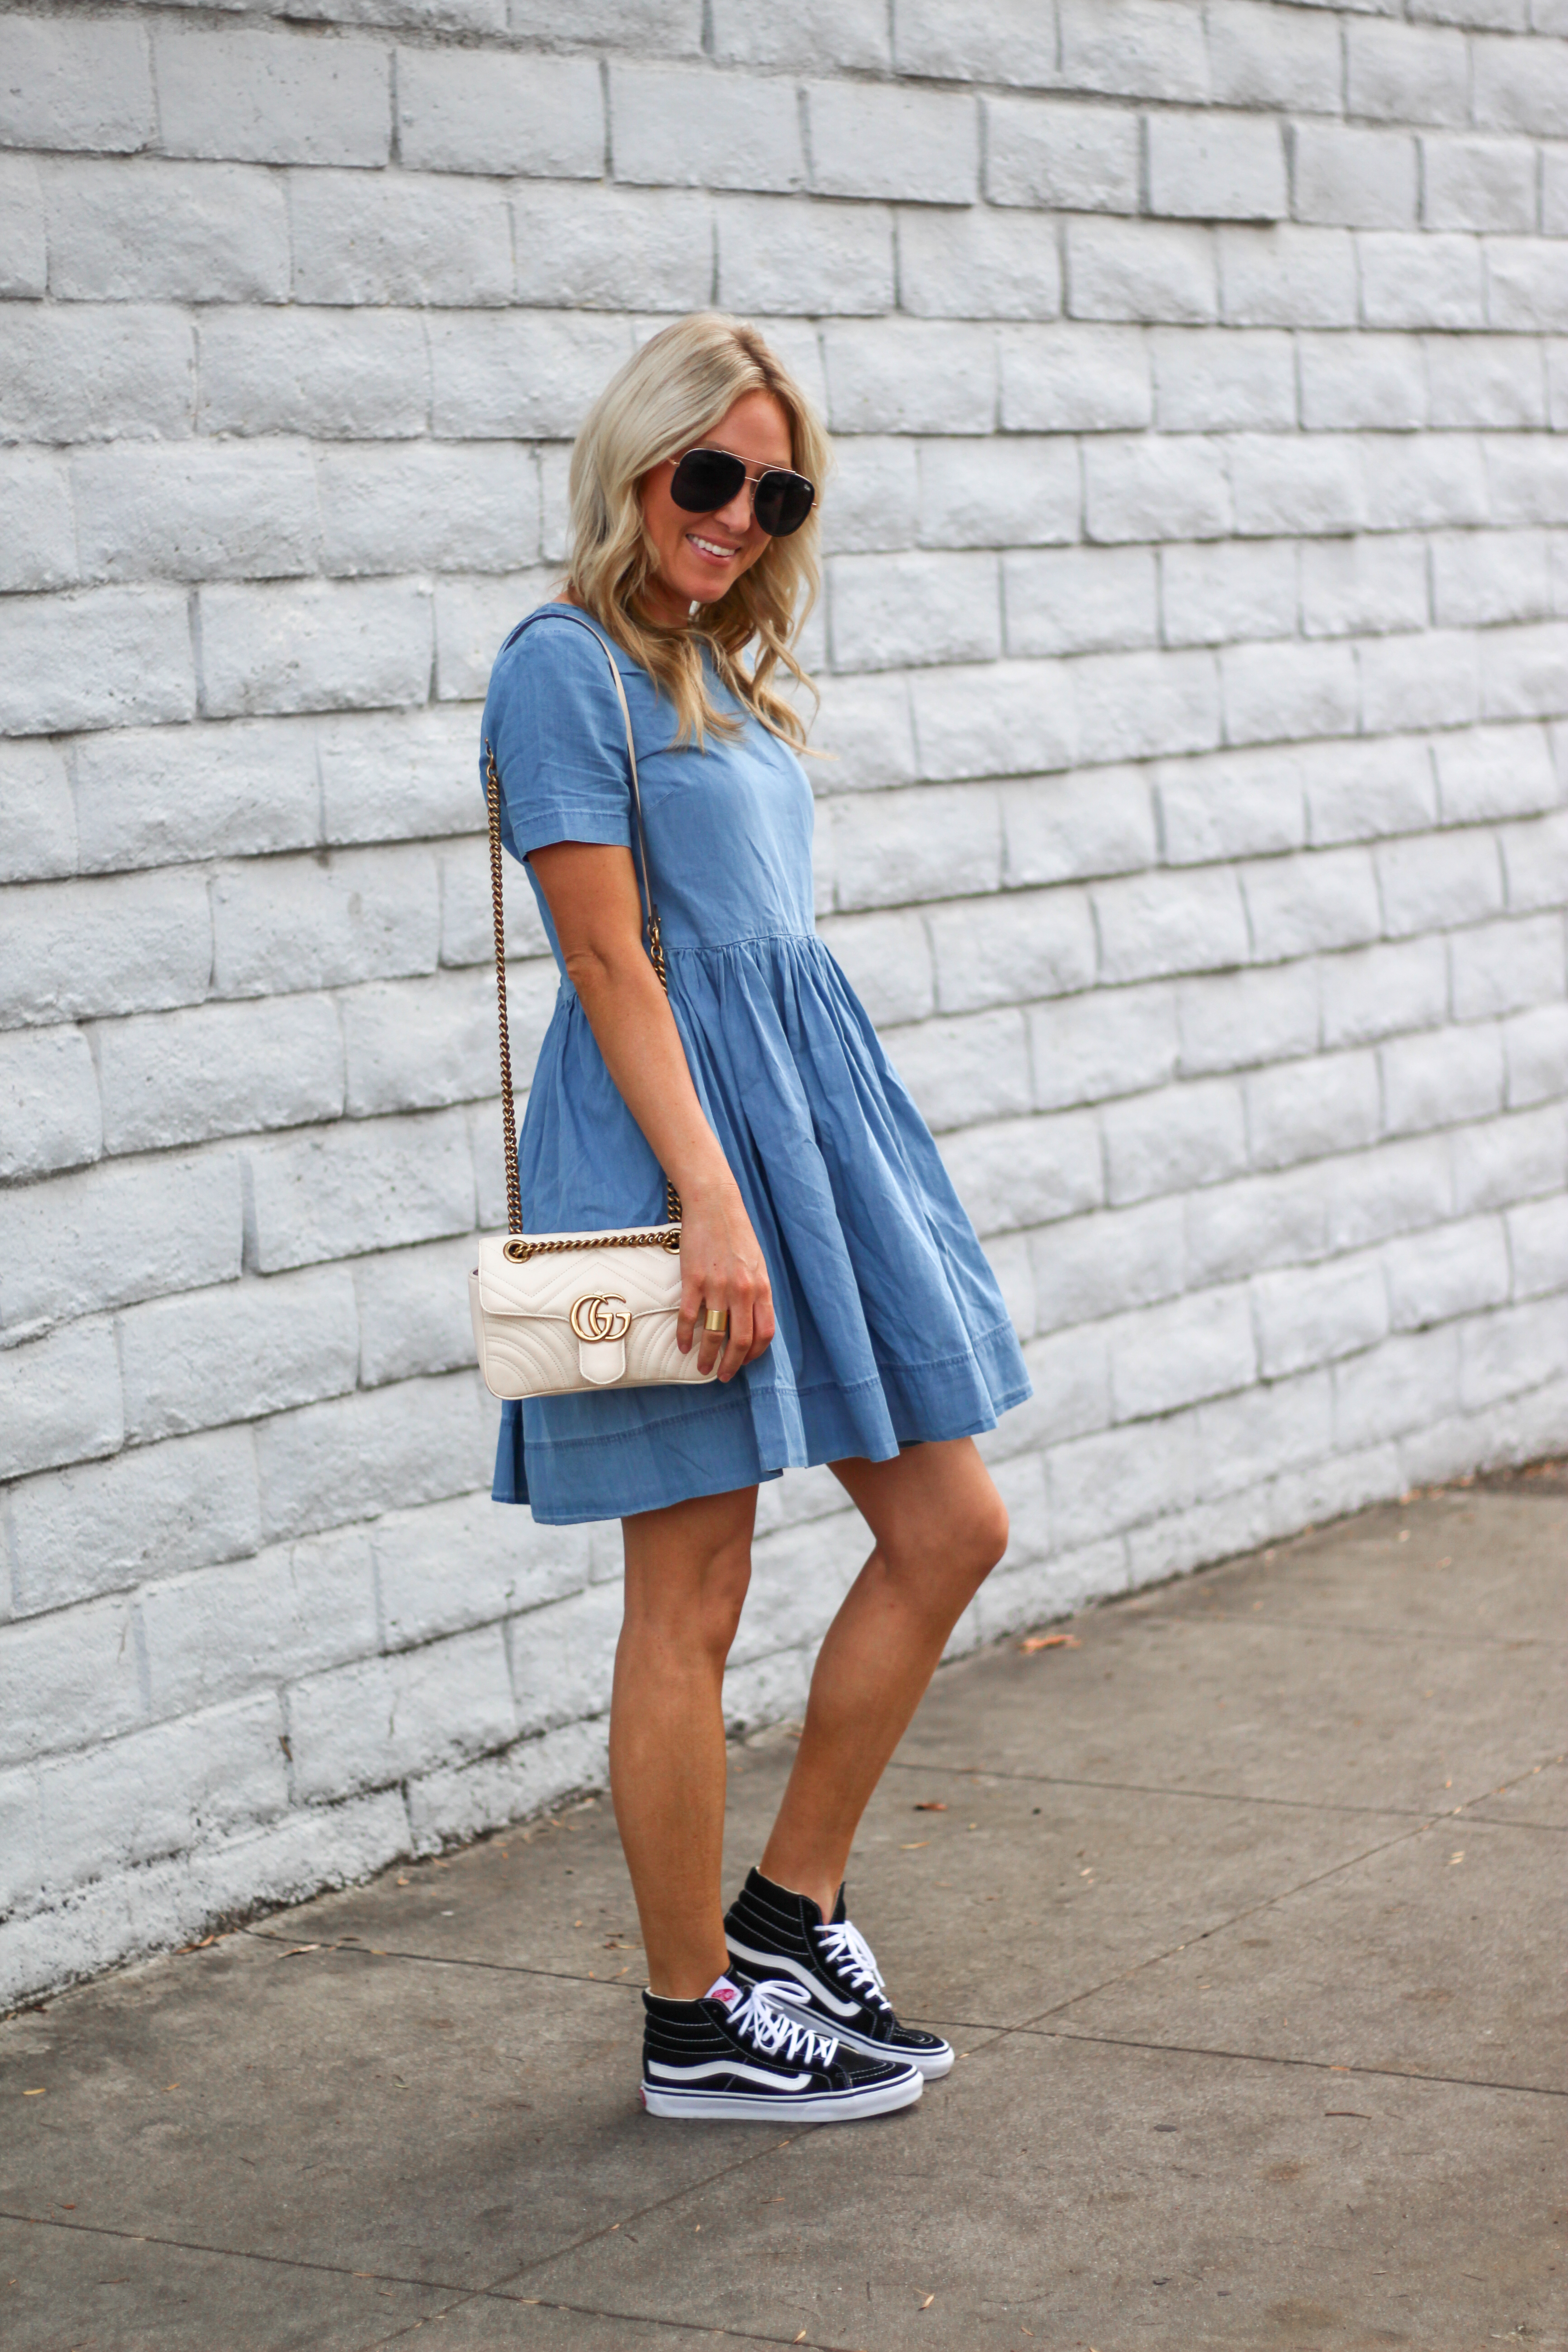 dress with vans shoes